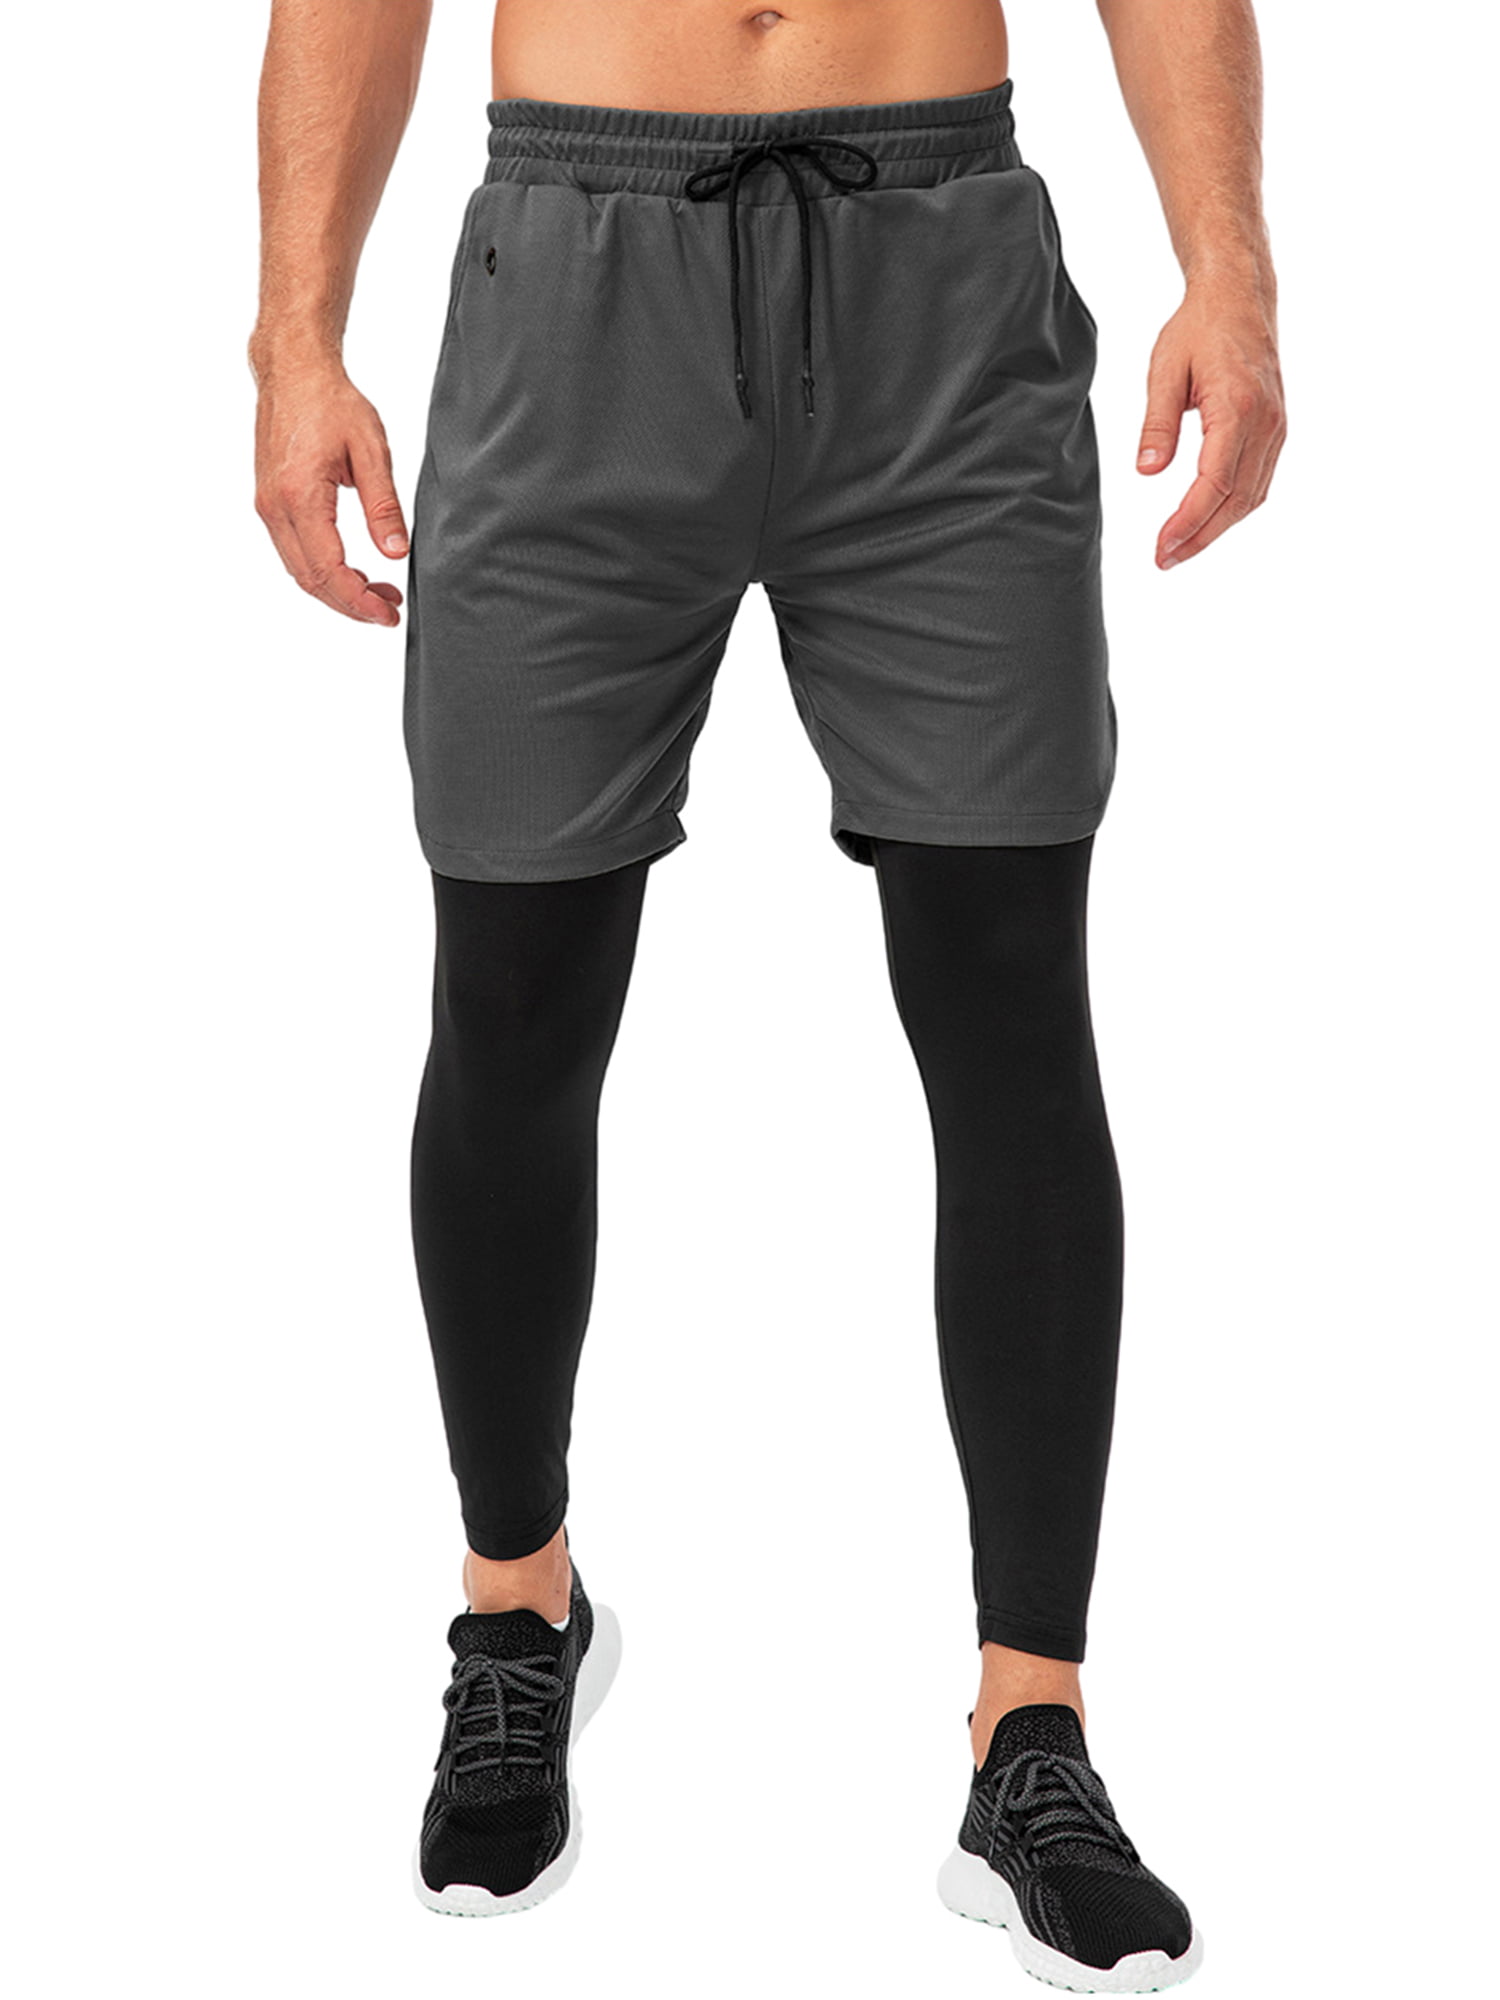 GRETD Running Sweatpants Mens Shorts and Leggings 2 in 1 Sportswear Gym  Fitness Sport Pants Legging (Color : A, Size : XXL Code) : :  Clothing, Shoes & Accessories